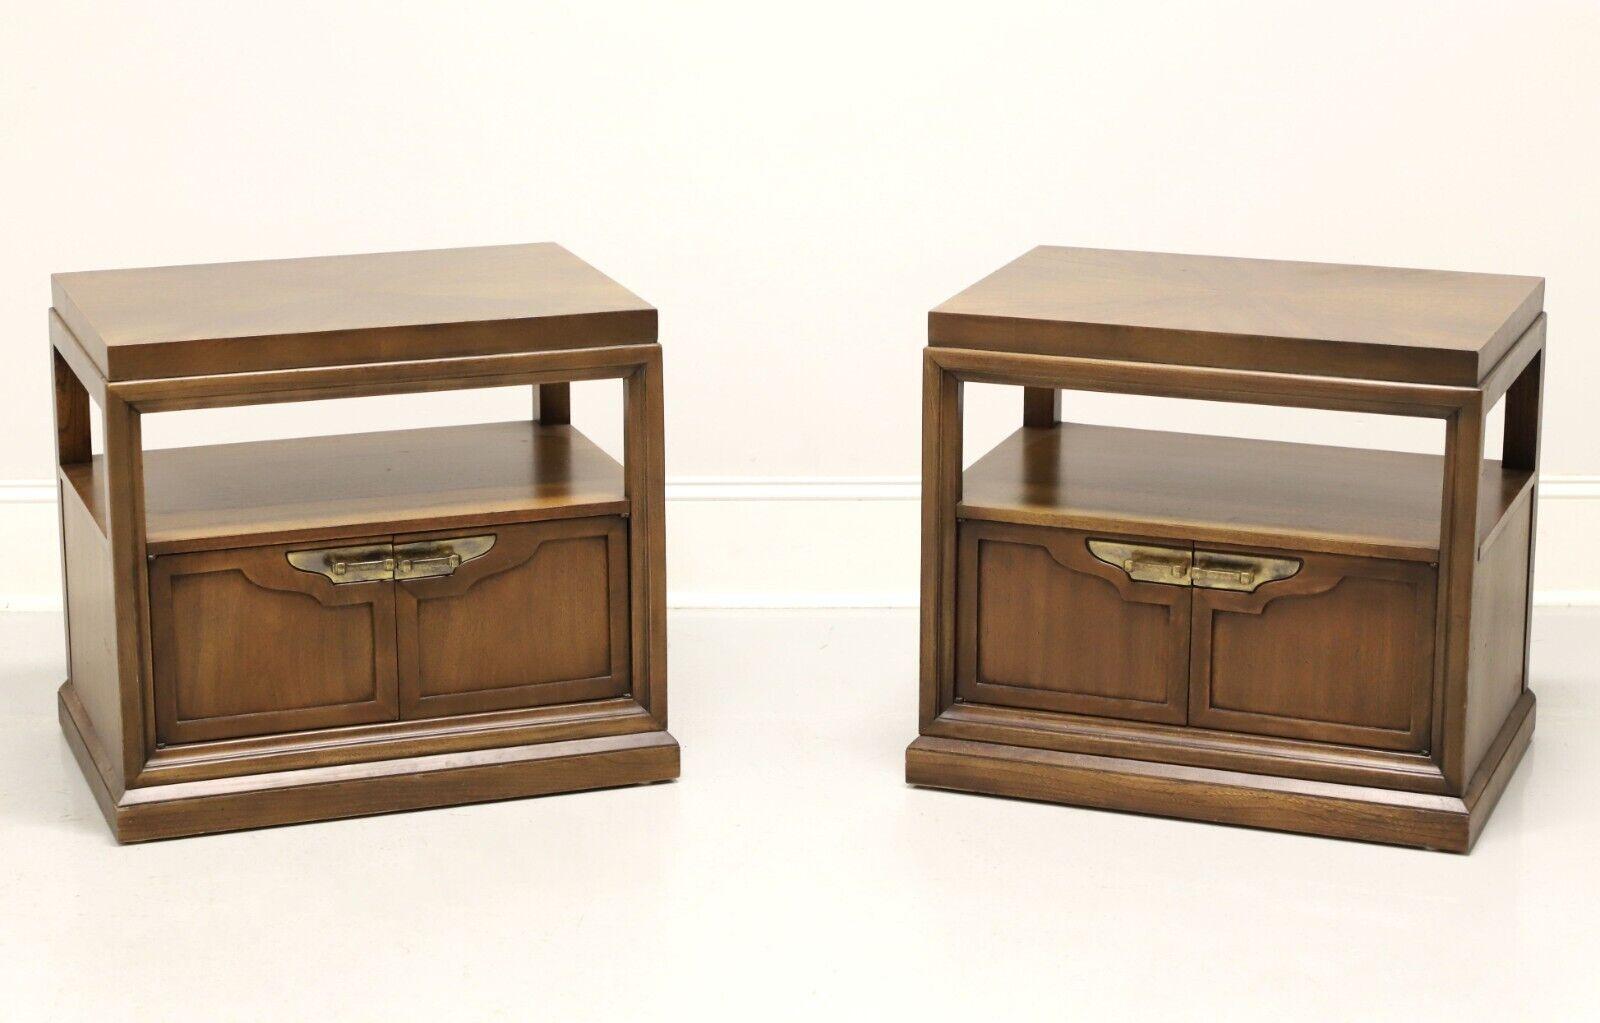 FANCHER 1960's Walnut Neoclassical Nightstands - Pair For Sale 3